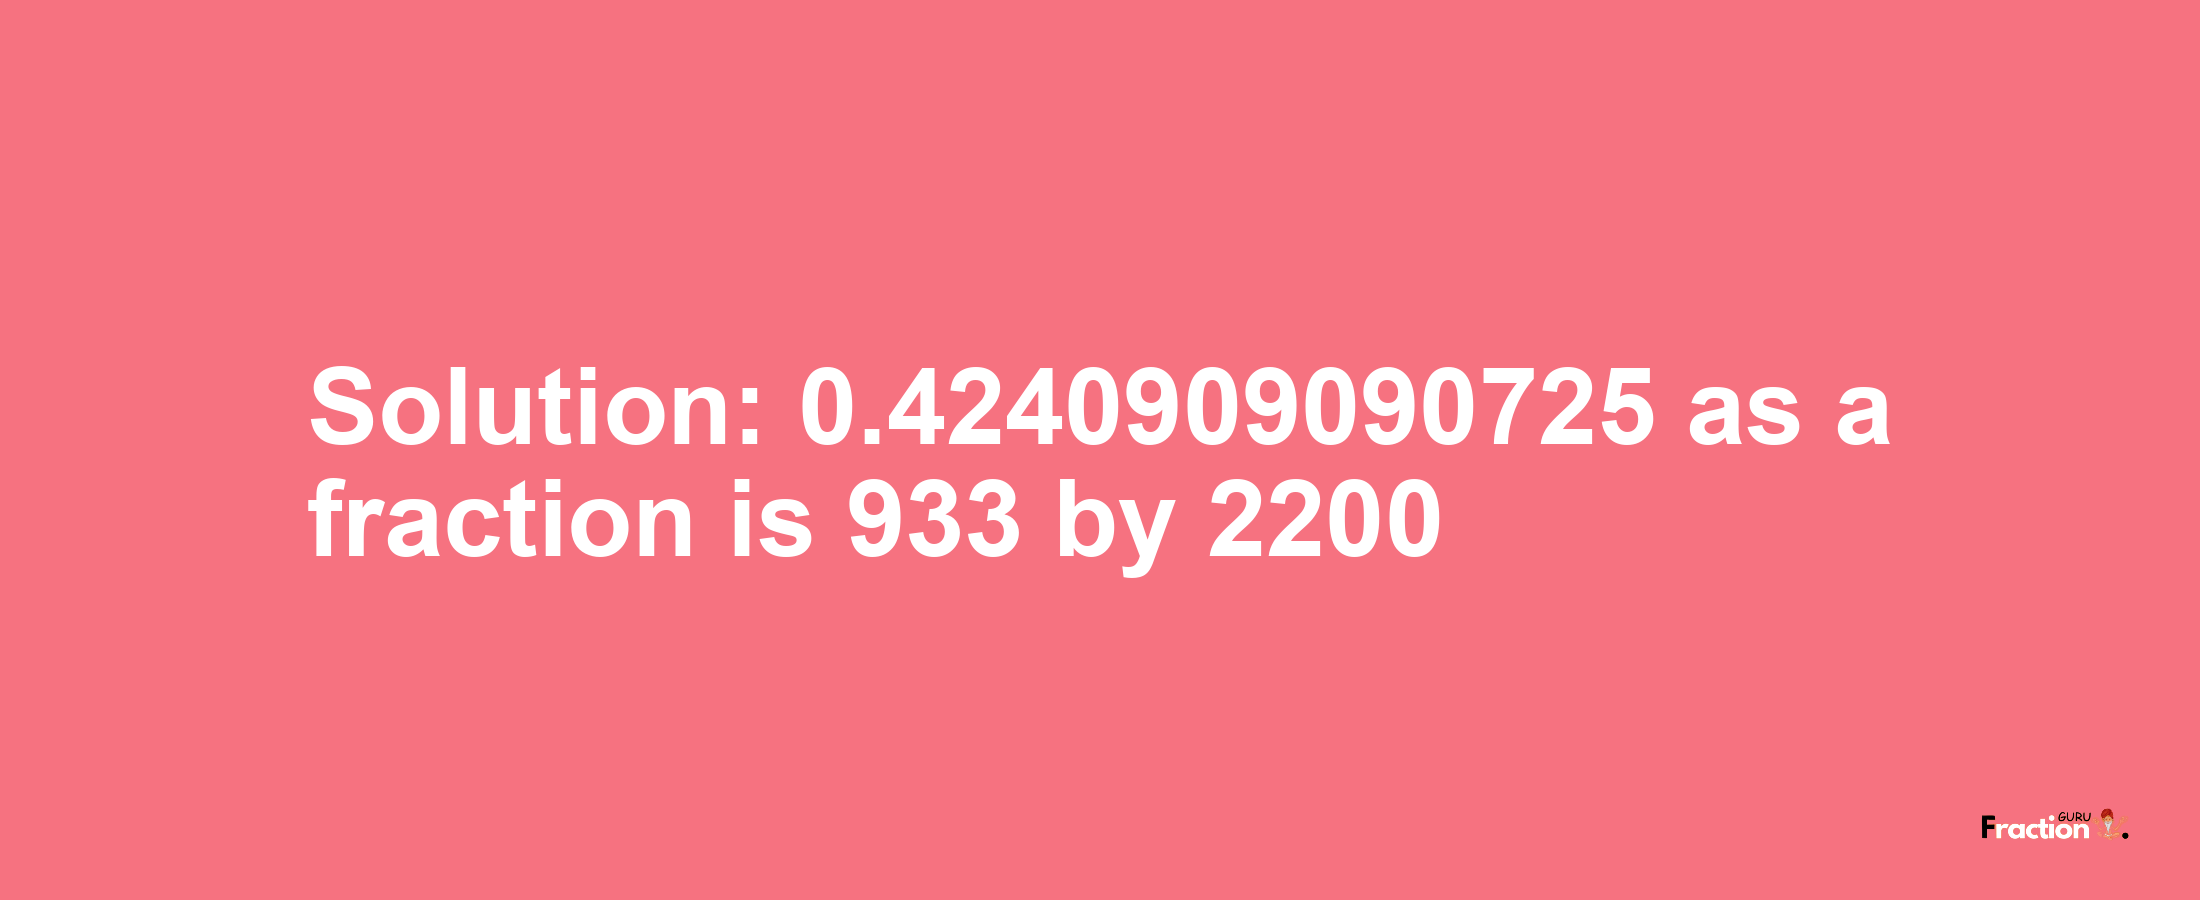 Solution:0.4240909090725 as a fraction is 933/2200